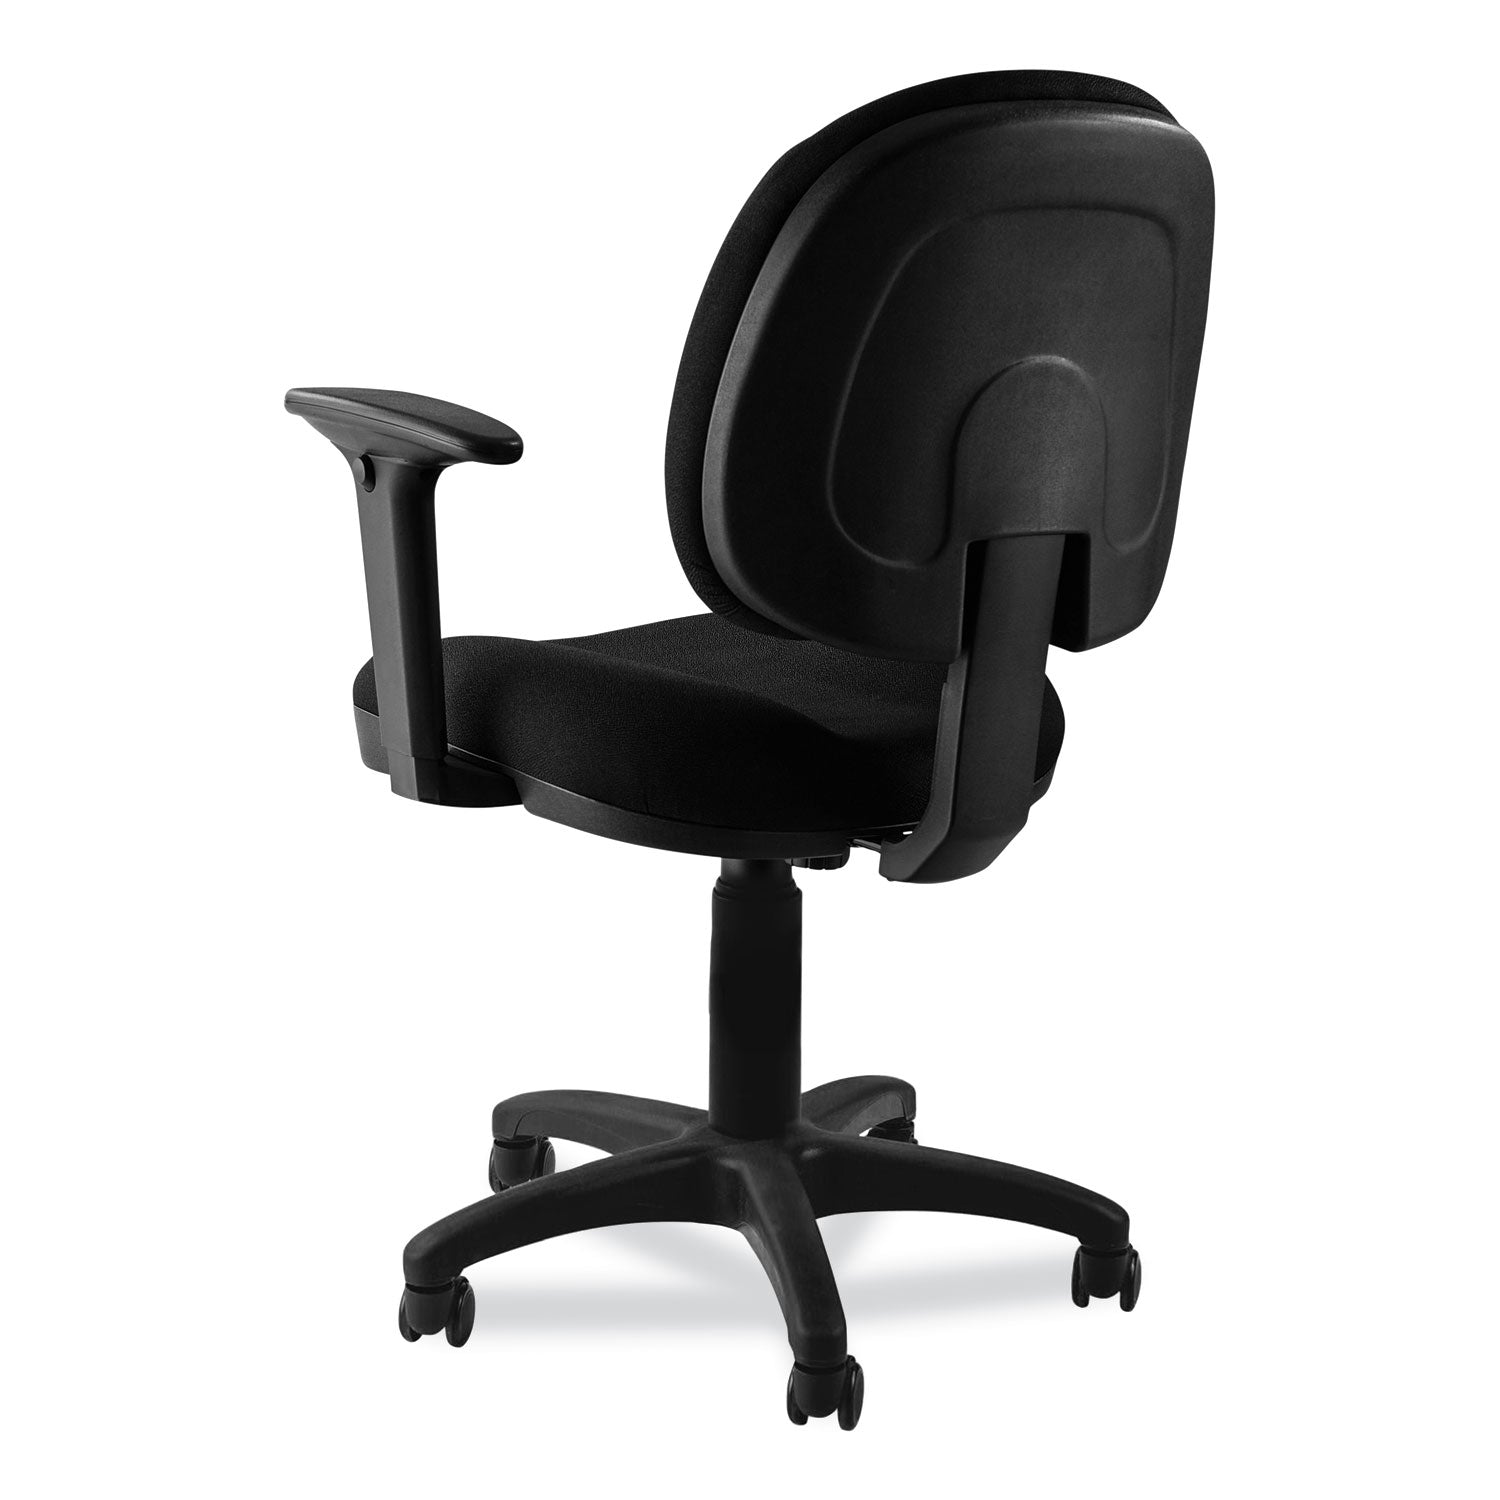 comfort-task-chair-with-arms-supports-up-to-300lb-19-to-23-seat-height-black-seat-back-black-baseships-in-1-3-bus-days_npsctca - 3